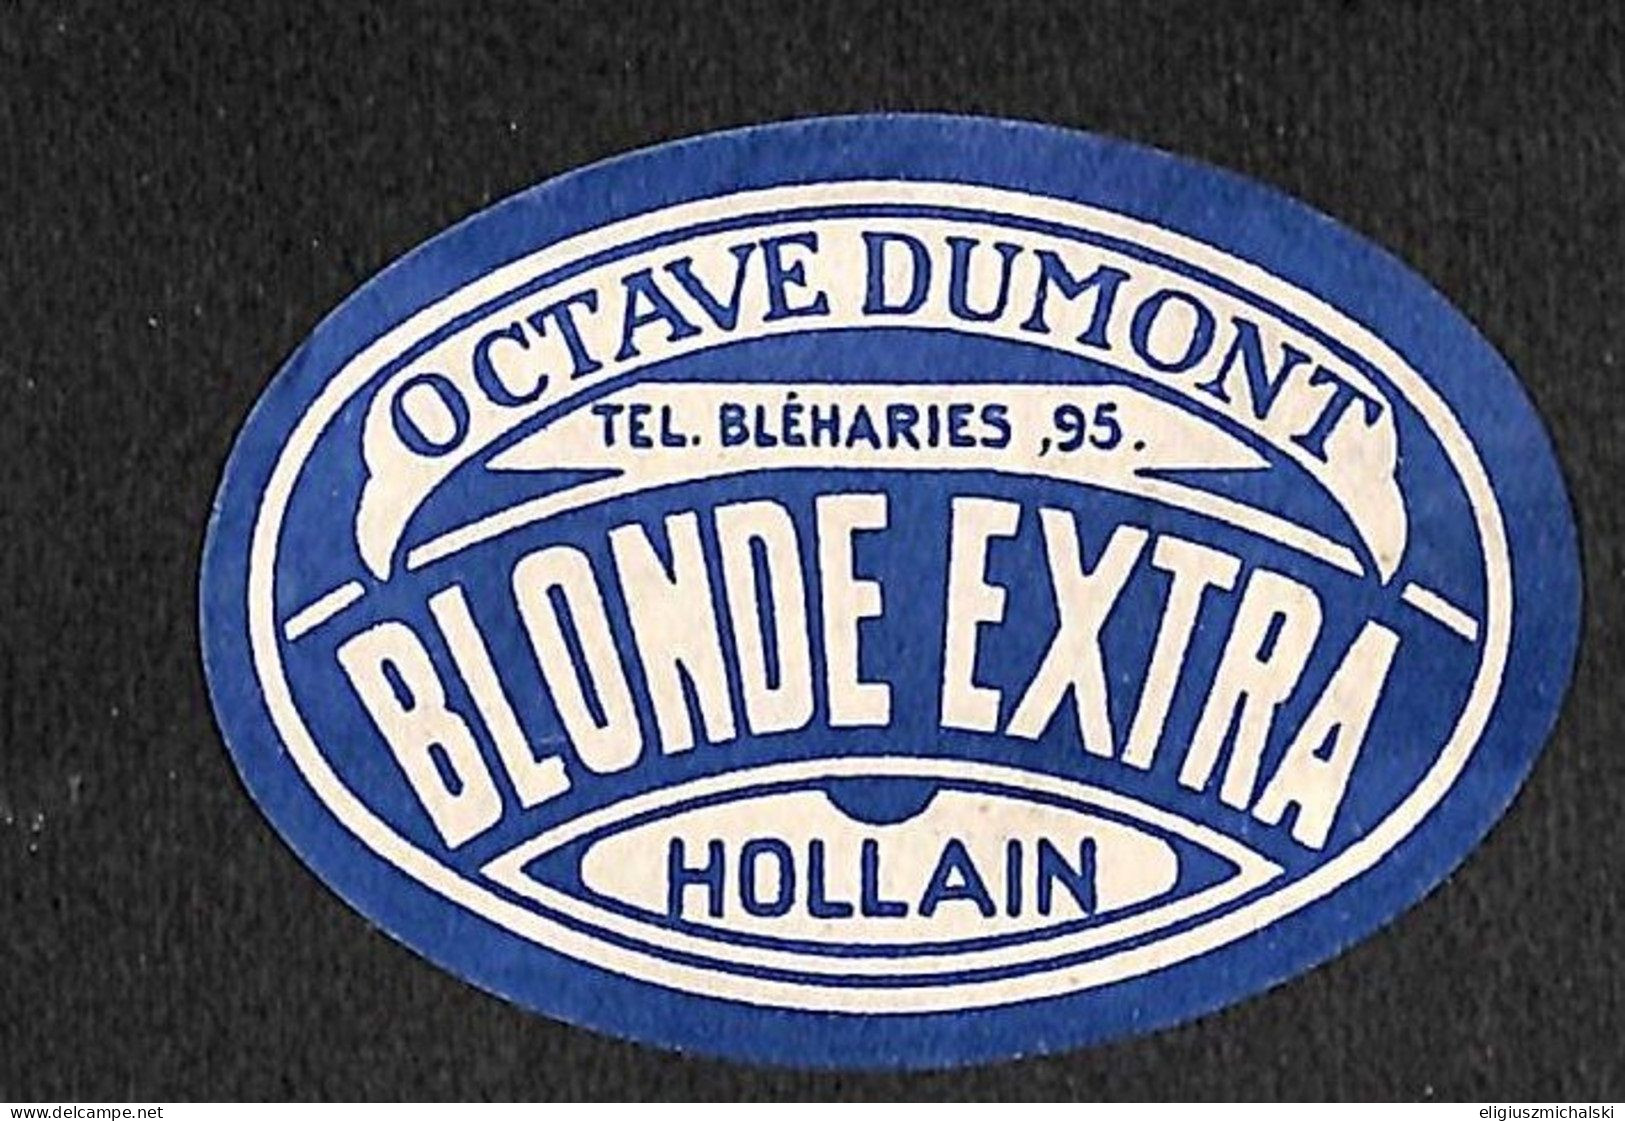 Hollain - Dumont Octave Blonde Extra - Beer